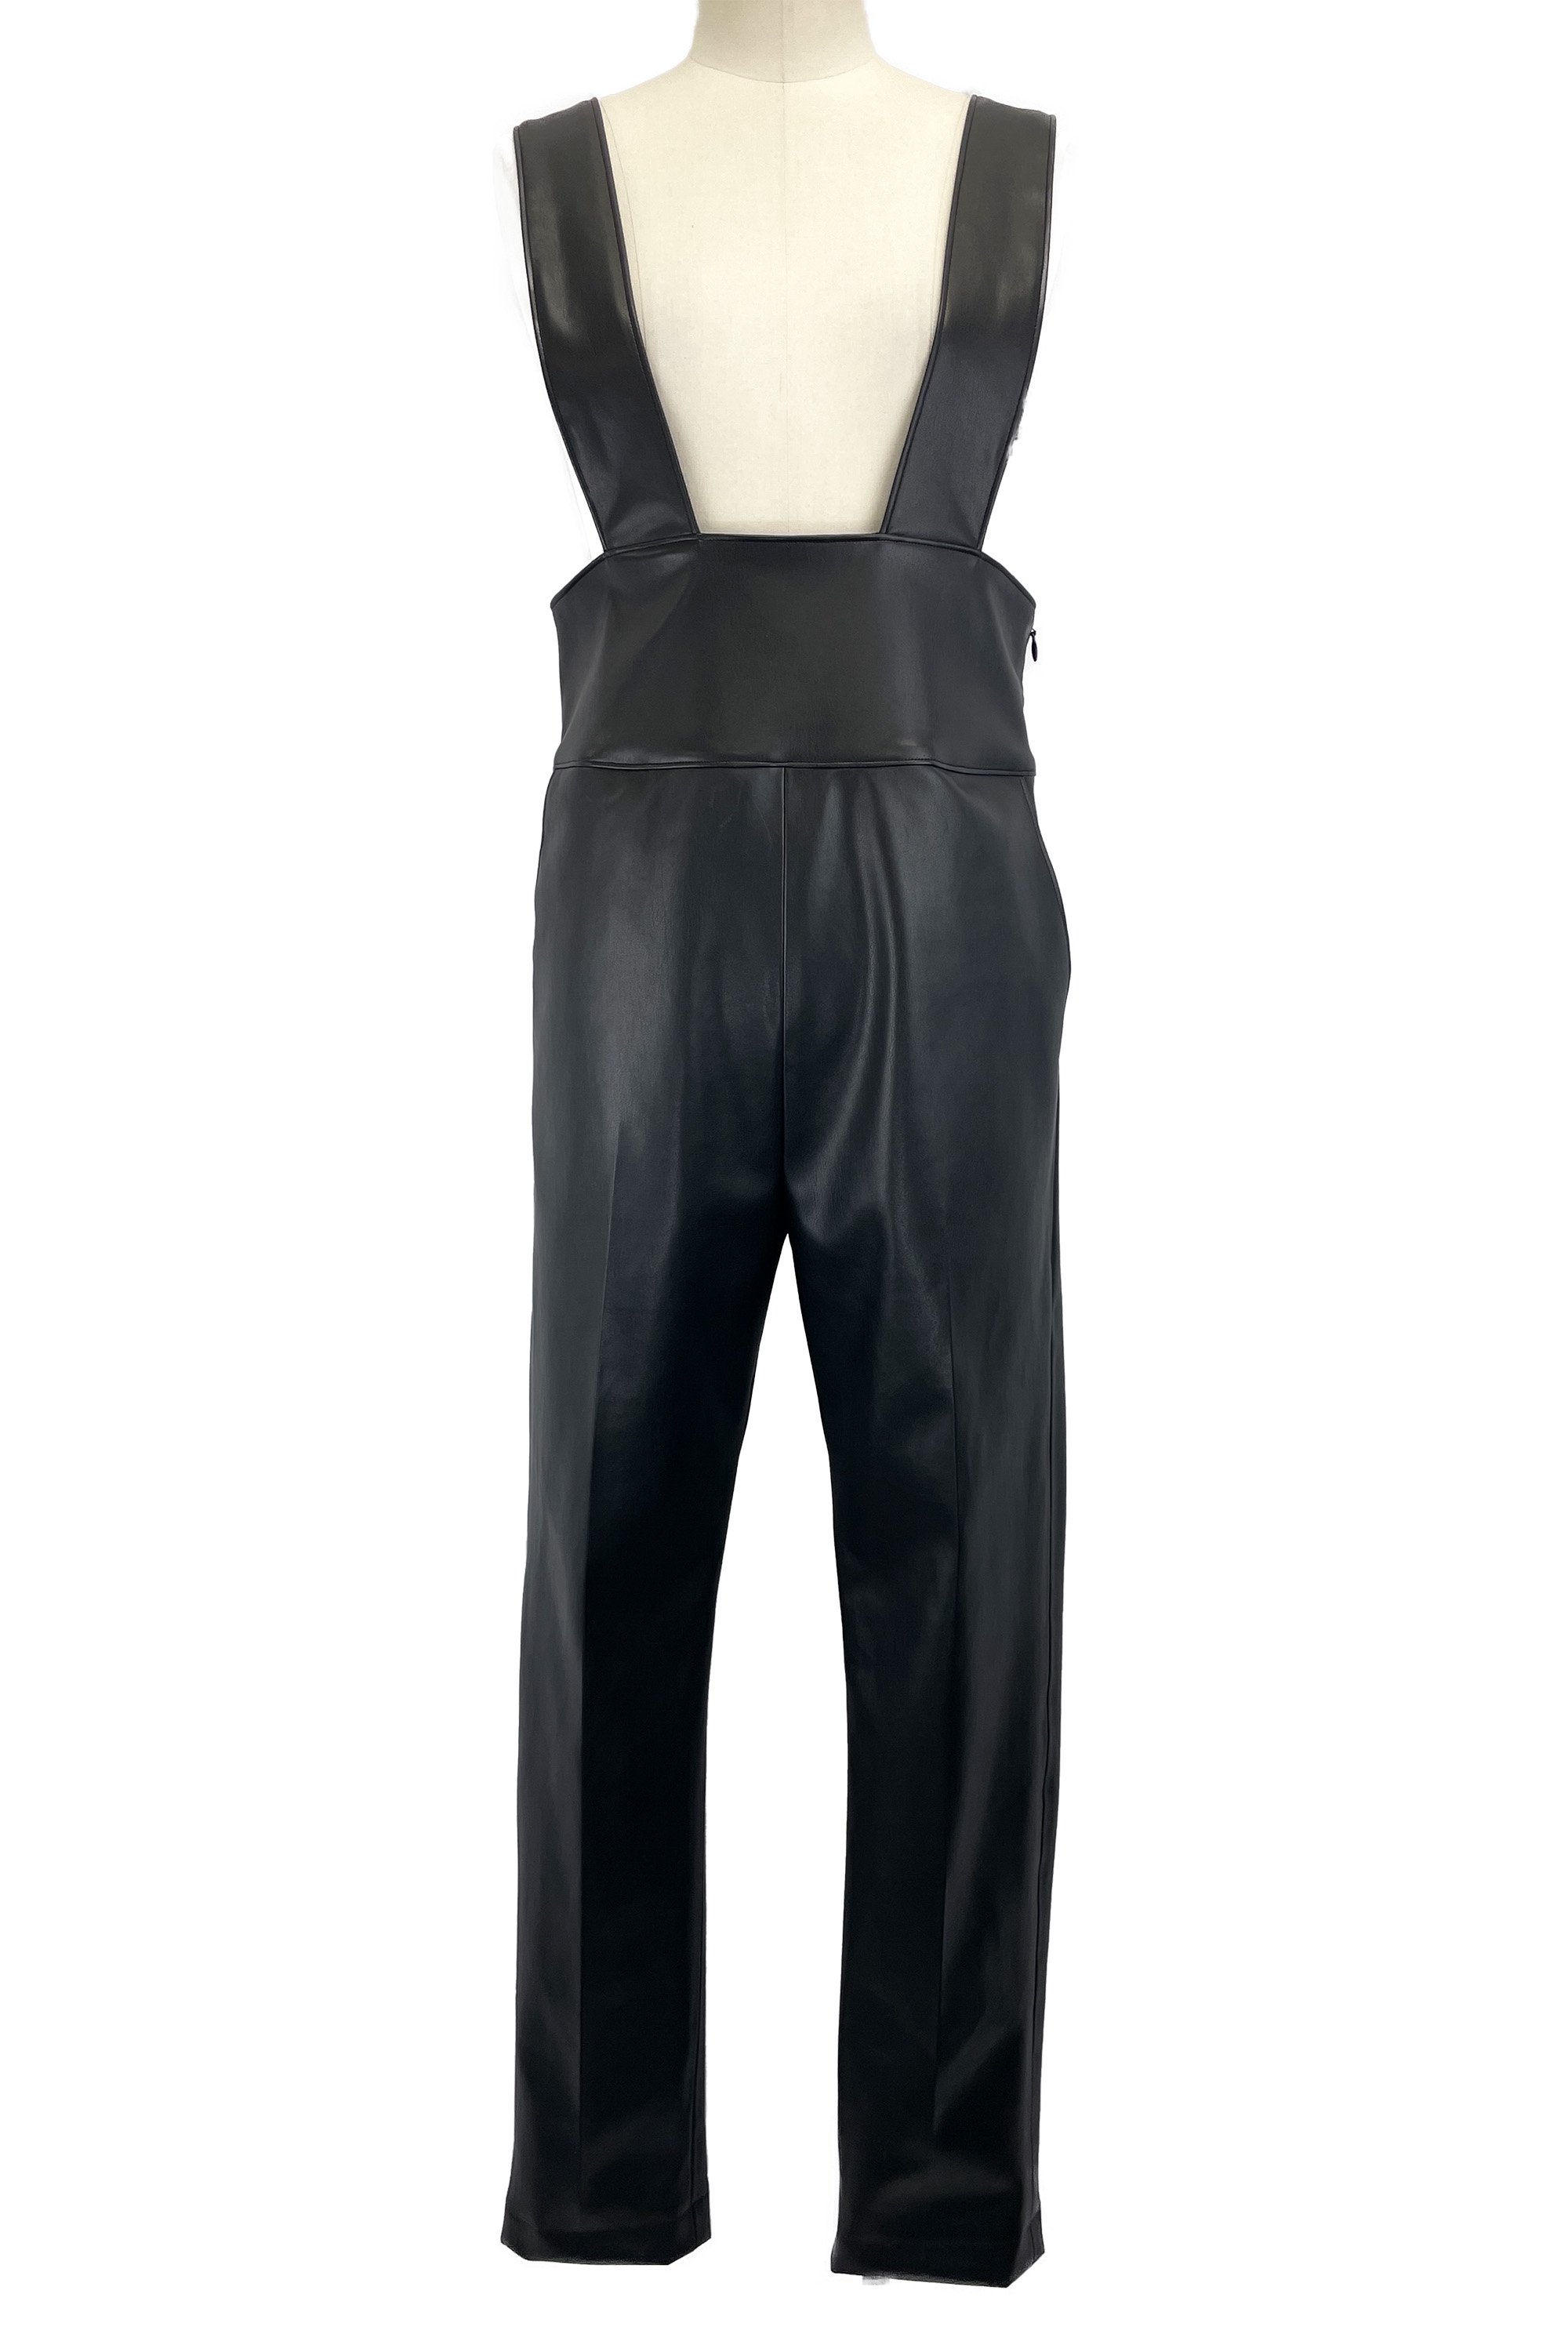 <img class='new_mark_img1' src='https://img.shop-pro.jp/img/new/icons6.gif' style='border:none;display:inline;margin:0px;padding:0px;width:auto;' />f's6 original Eco leather Jumpsuit